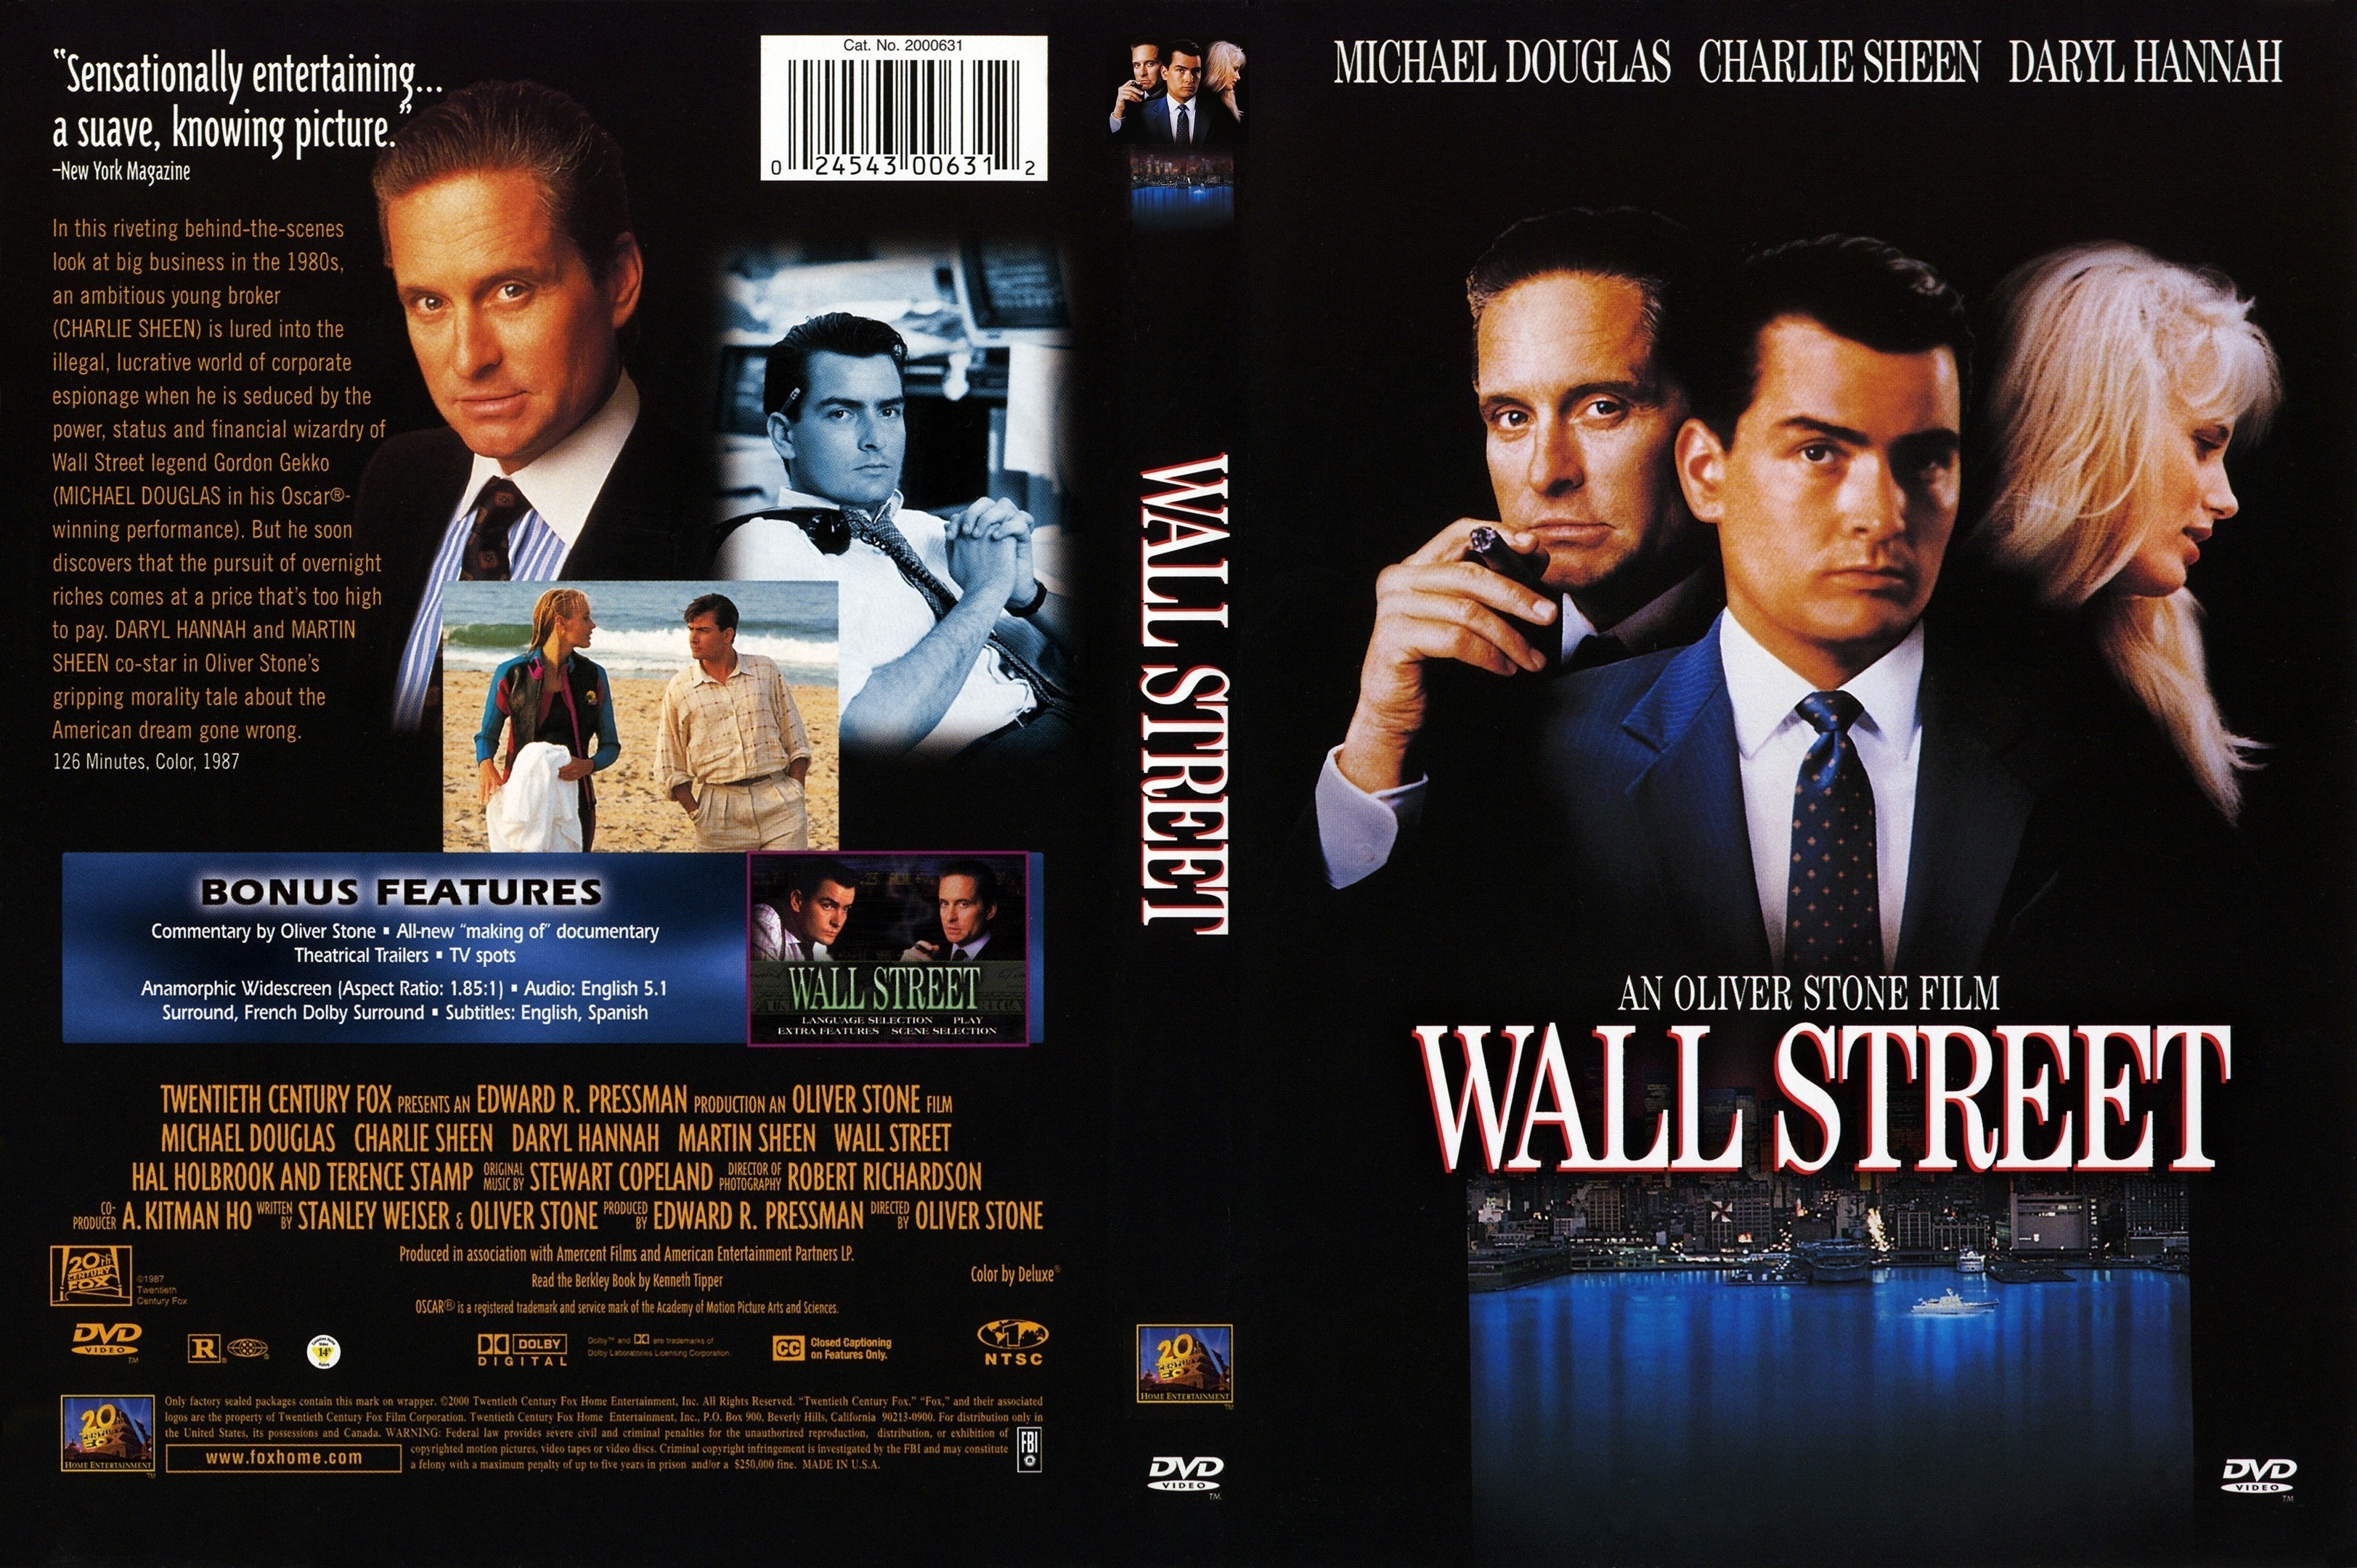 Jaquette DVD Wall street (Canadienne) (BLU-RAY)